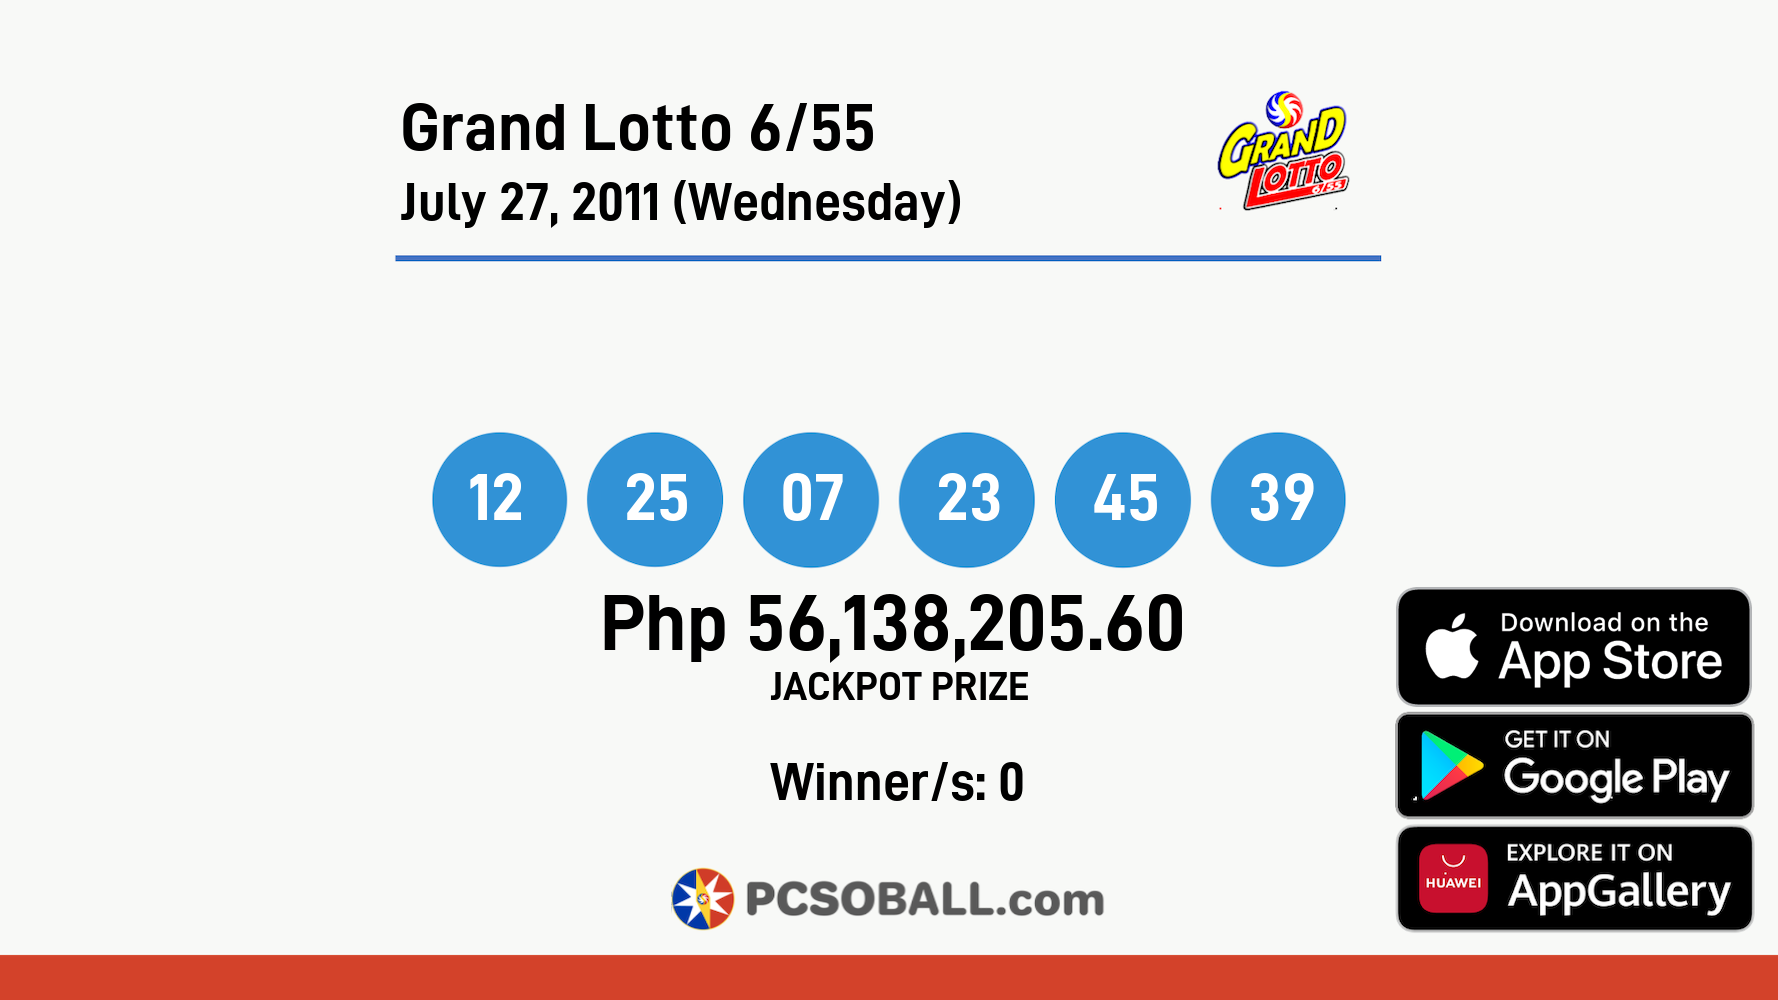 Grand Lotto 6/55 July 27, 2011 (Wednesday) Result